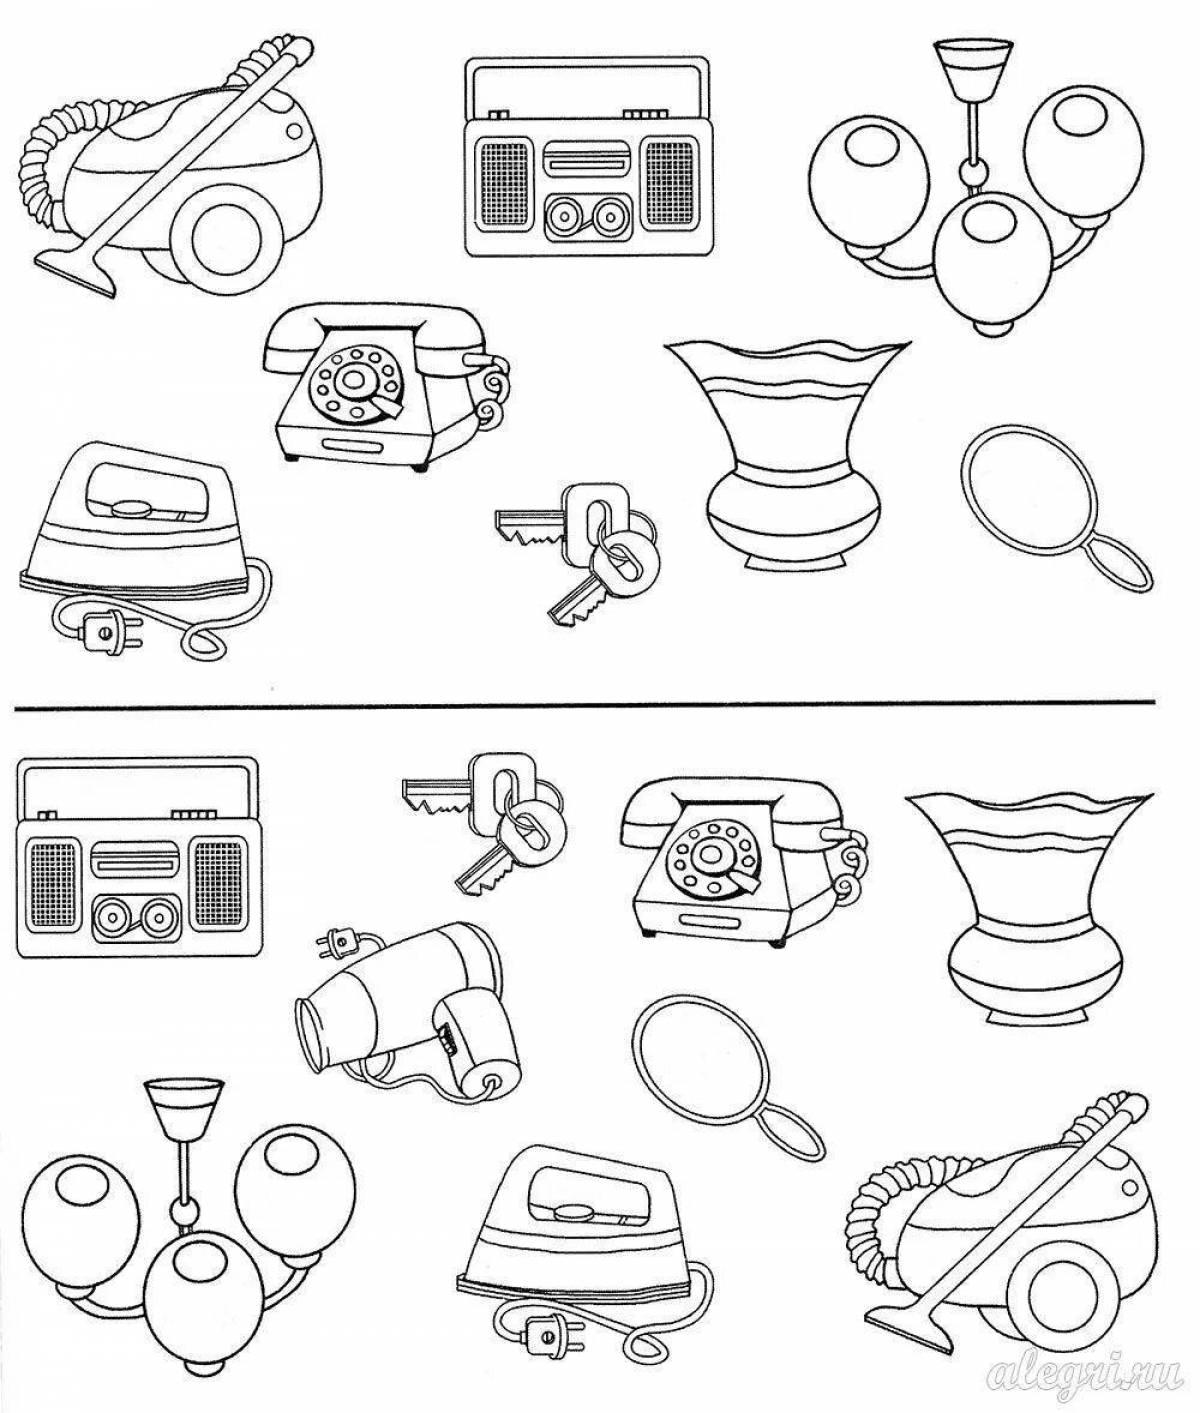 Colorful household appliances coloring book for kindergarten